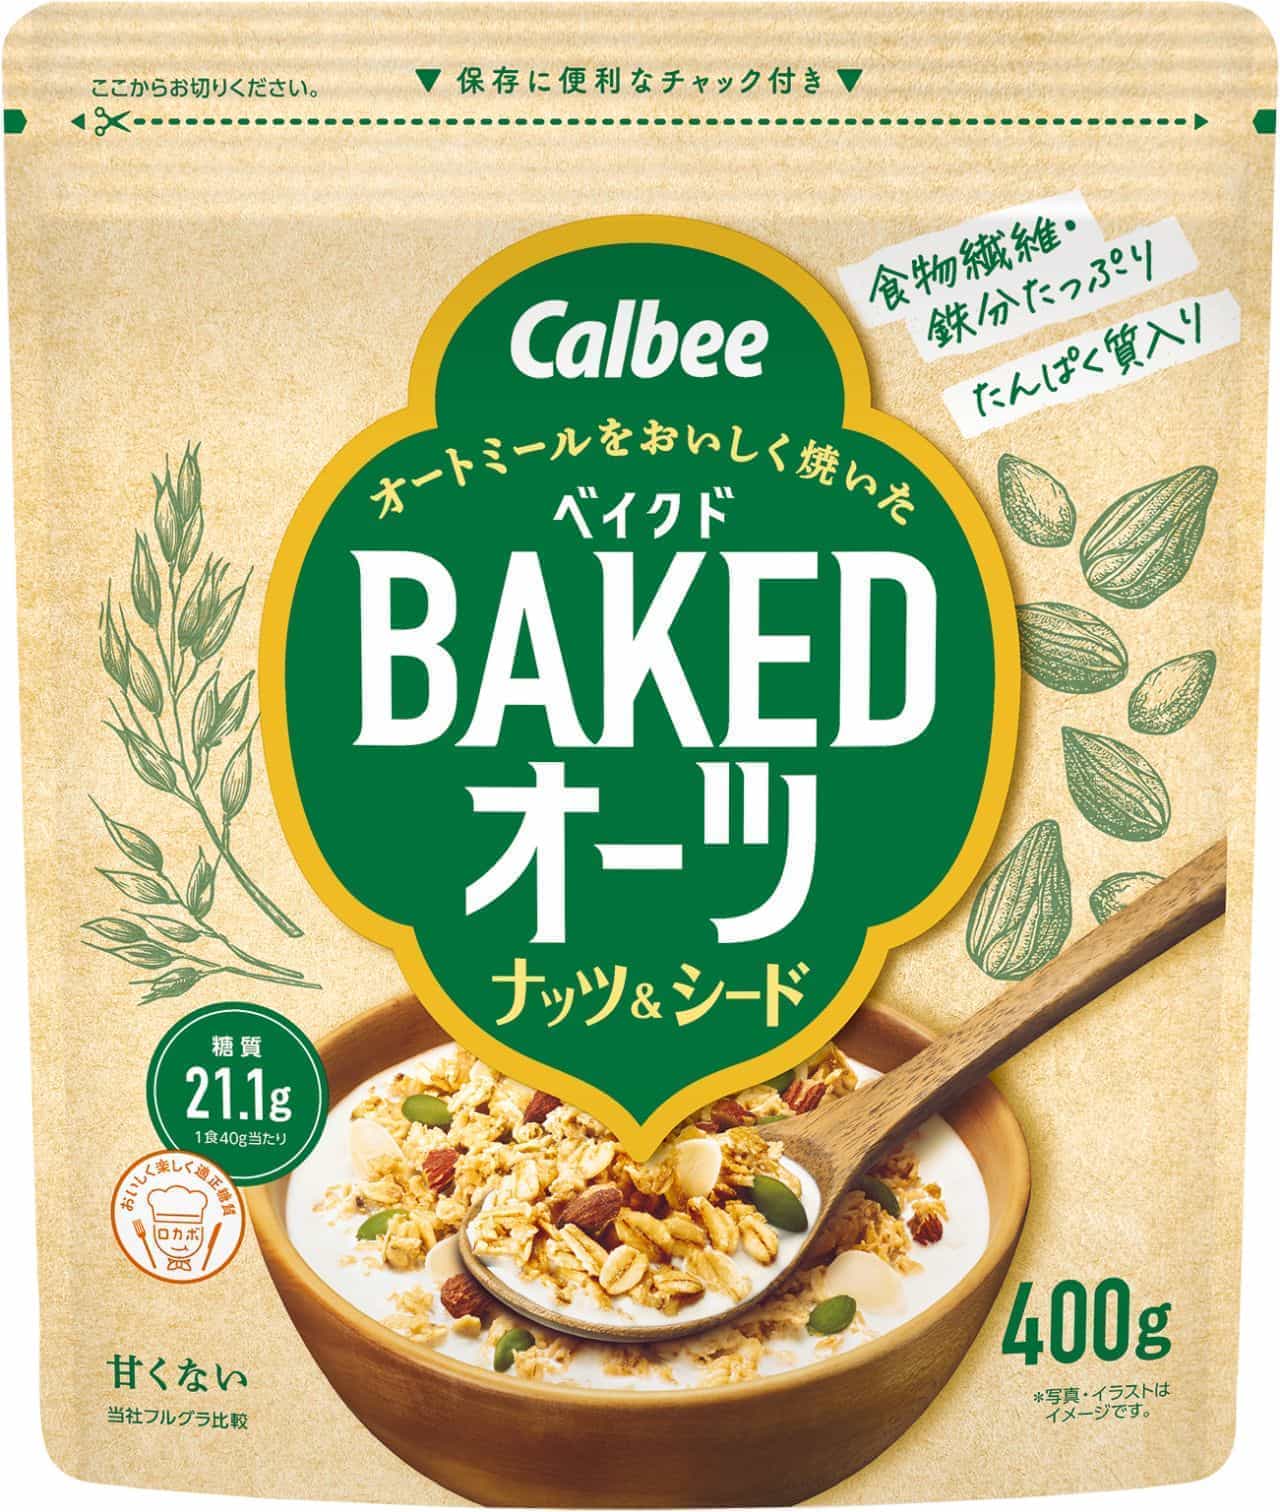 Calbee "Baked Oats Nuts & Seeds